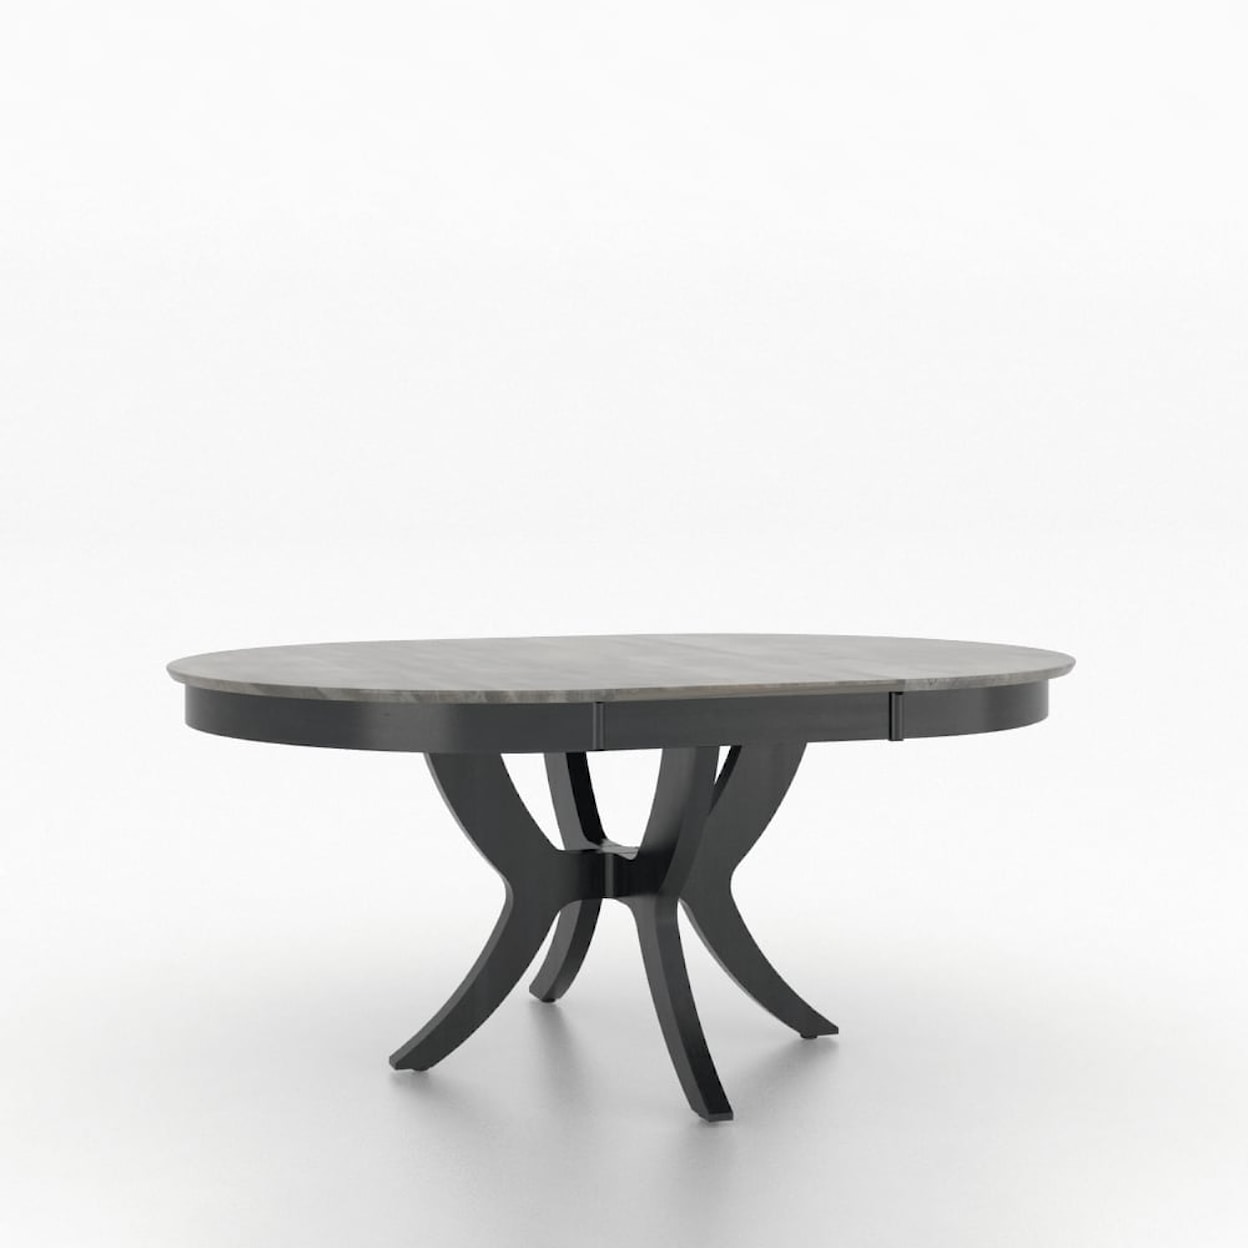 Canadel Canadel Customizable Dining Table with Leaf